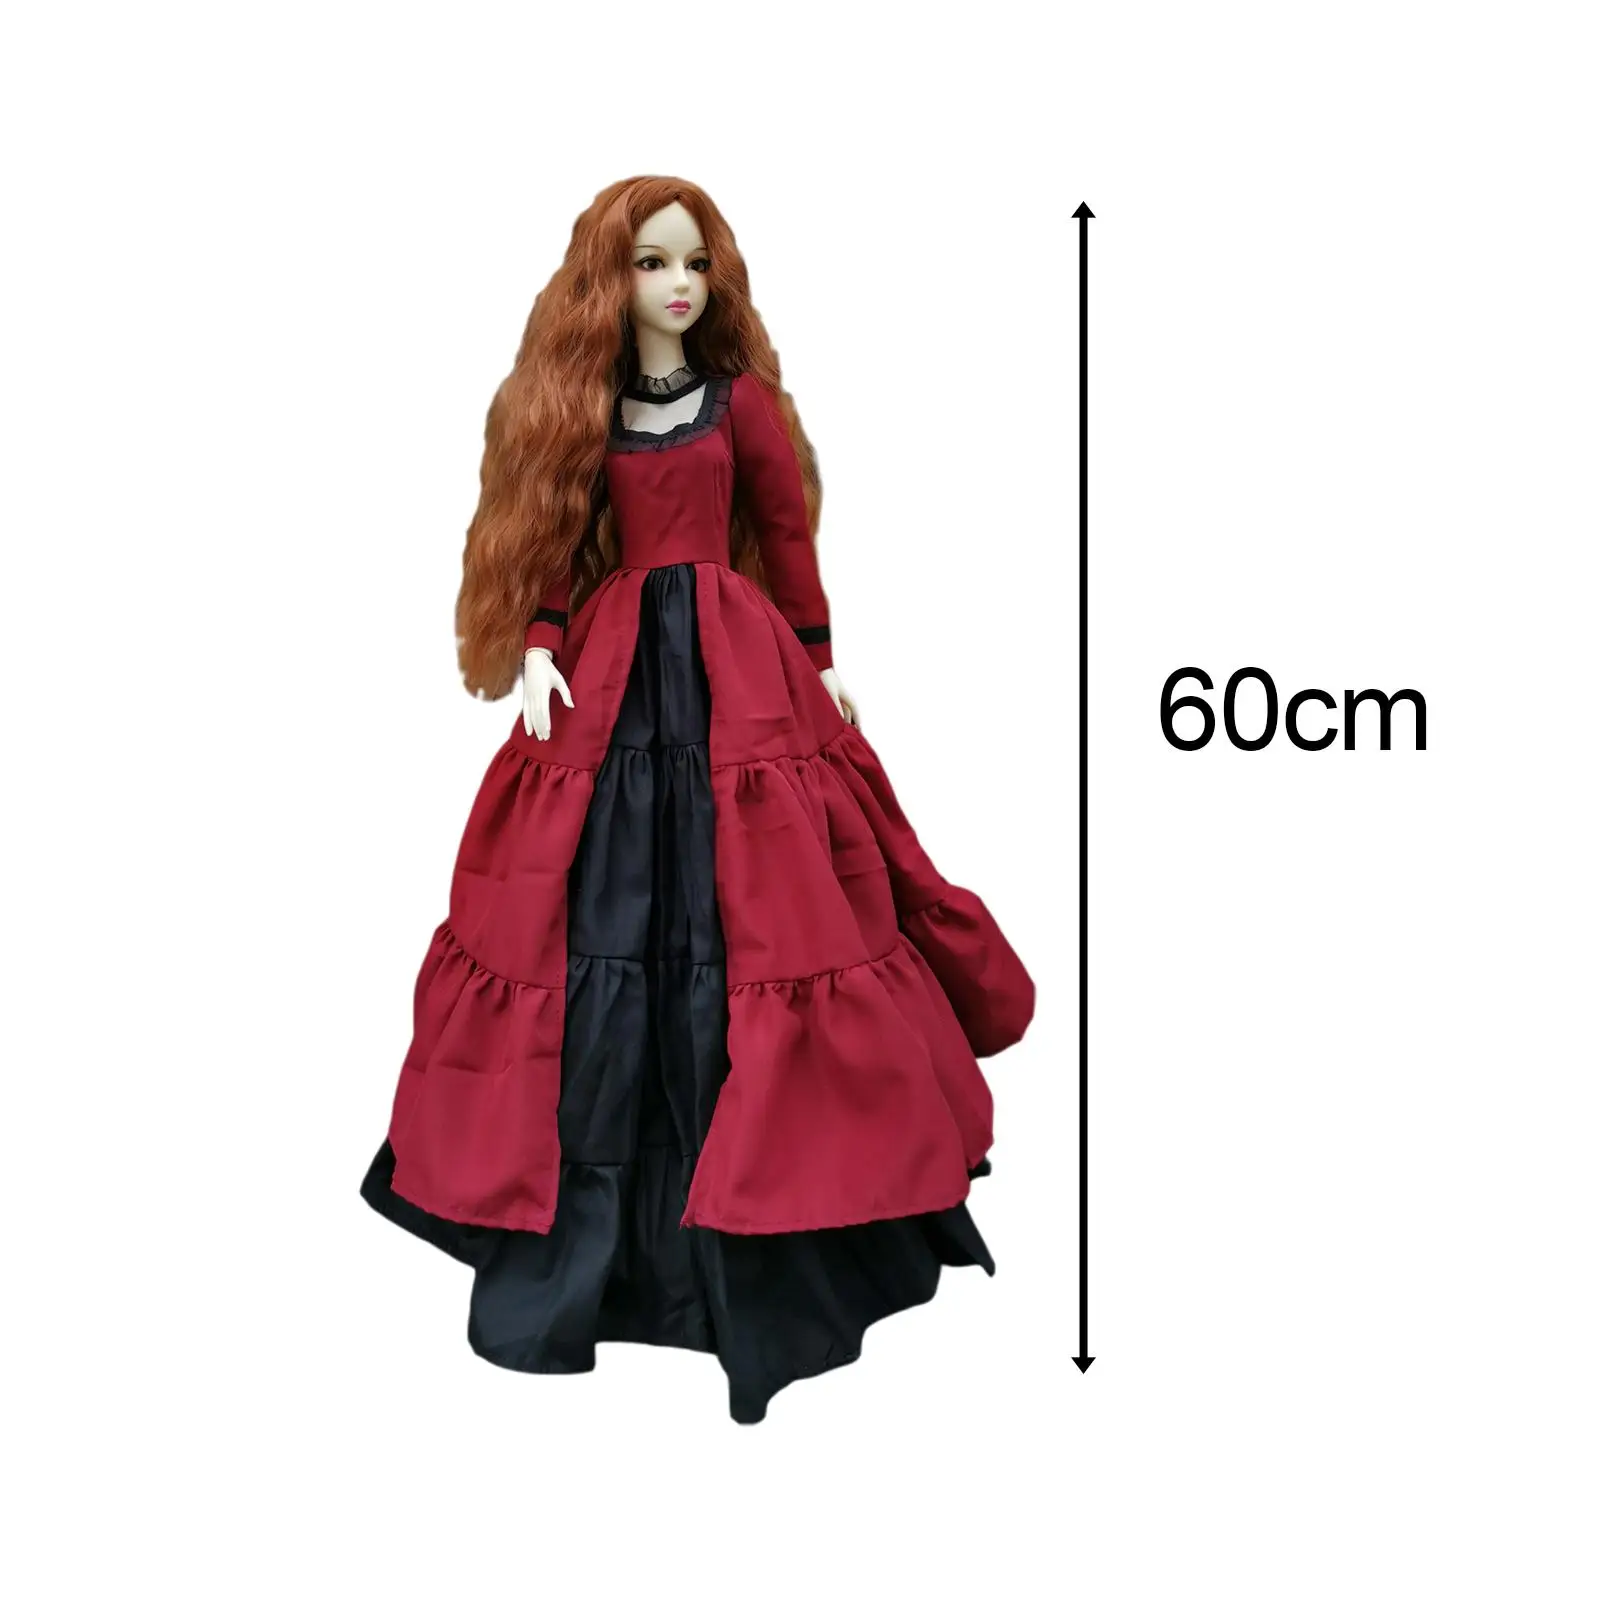 Ball Jointed Doll 1/3 Dolls Rotatable Joints Princess Doll 24 inch Doll Action Figures for Thanksgiving Girls